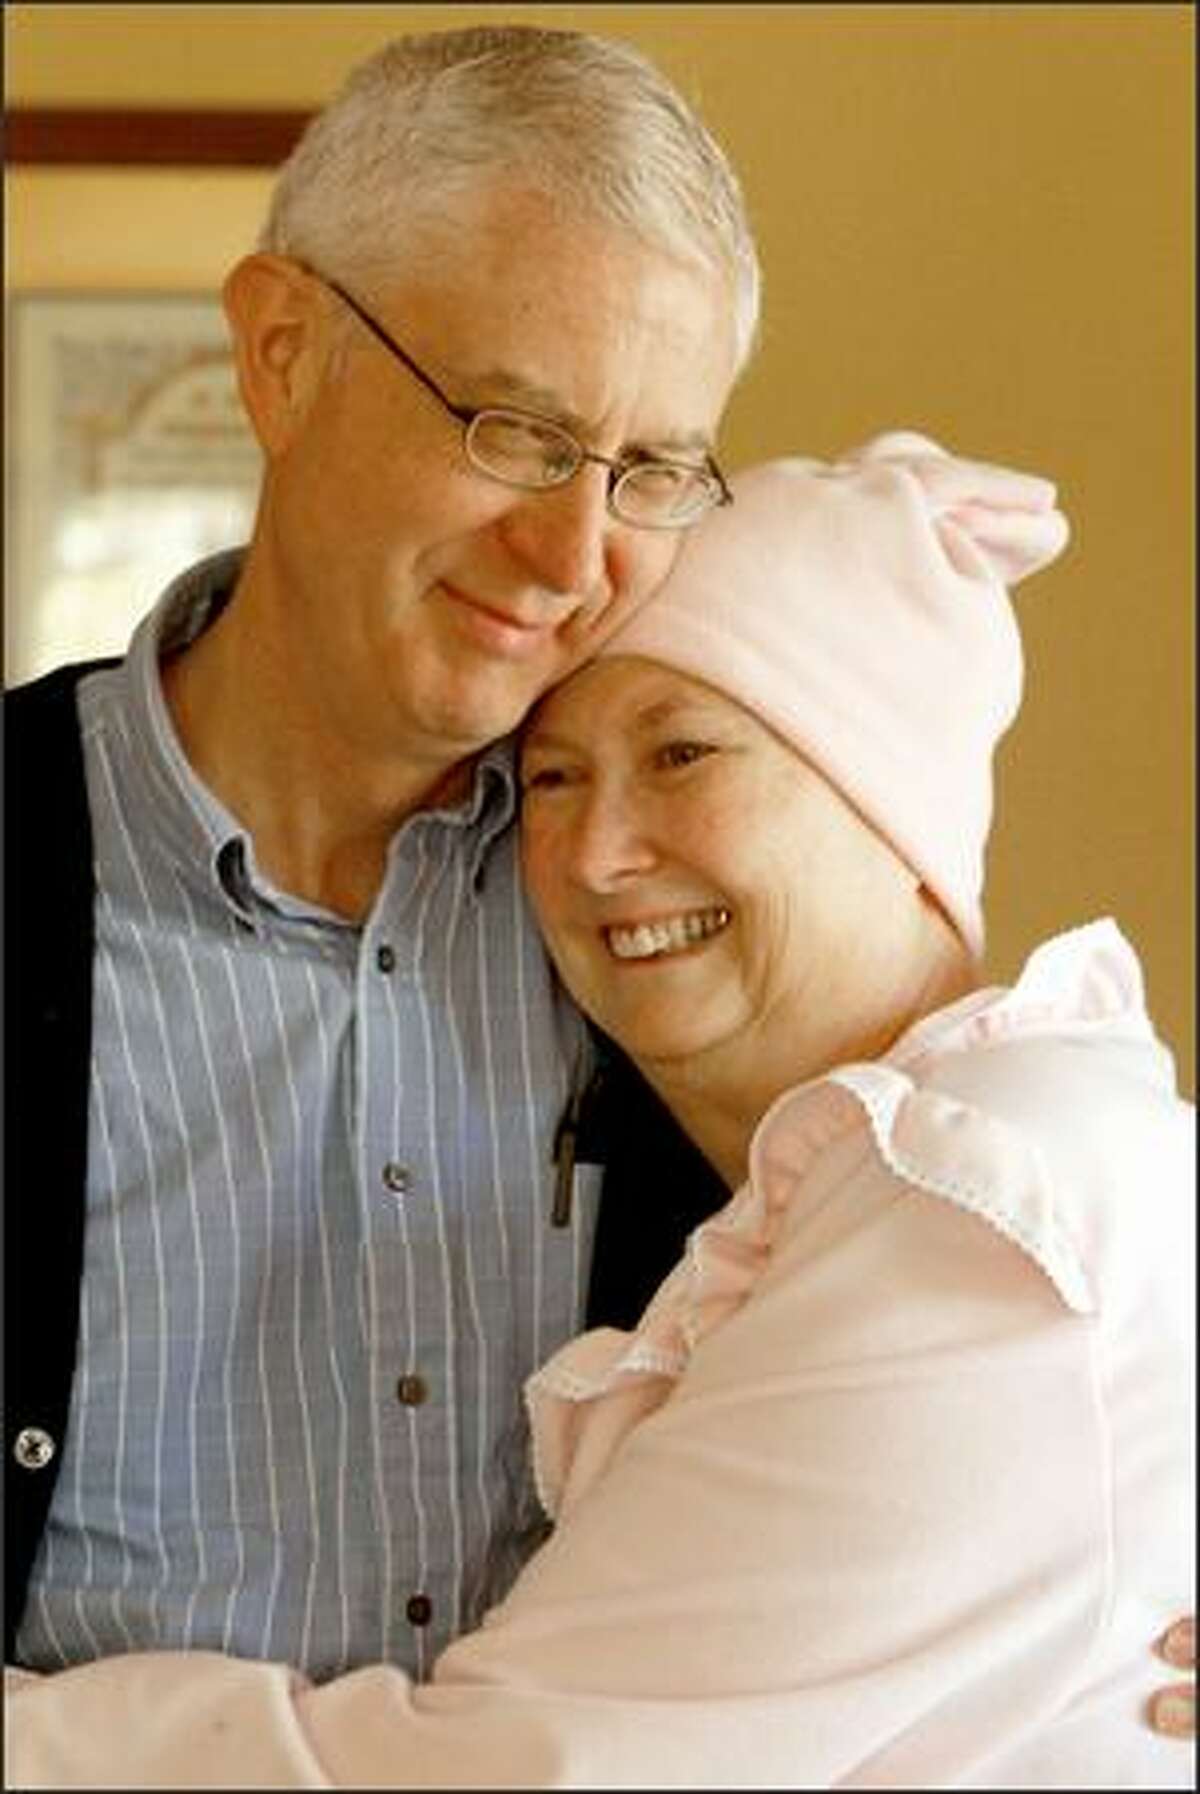 Neil Faulkner gives his wife, Kay, a big hug after the massage session is over. Kay Faulkner, 59, is dying of ovarian cancer; massage eases her pain.